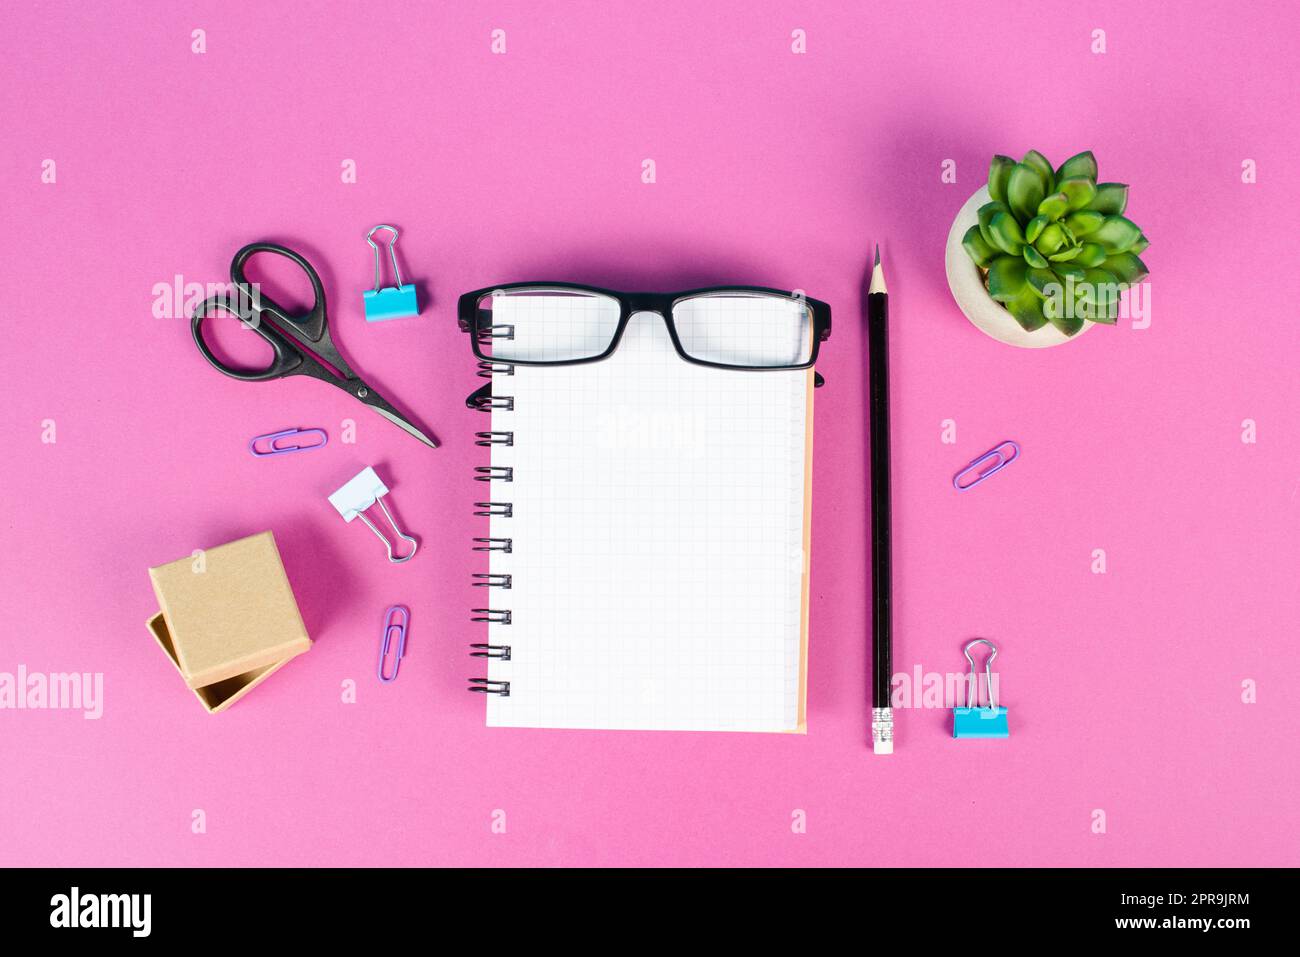 Empty notebook with a pen, eyeglasses and a cactus on a pink colored desk, brainstorming for new ideas, writing a message, home office workplace Stock Photo